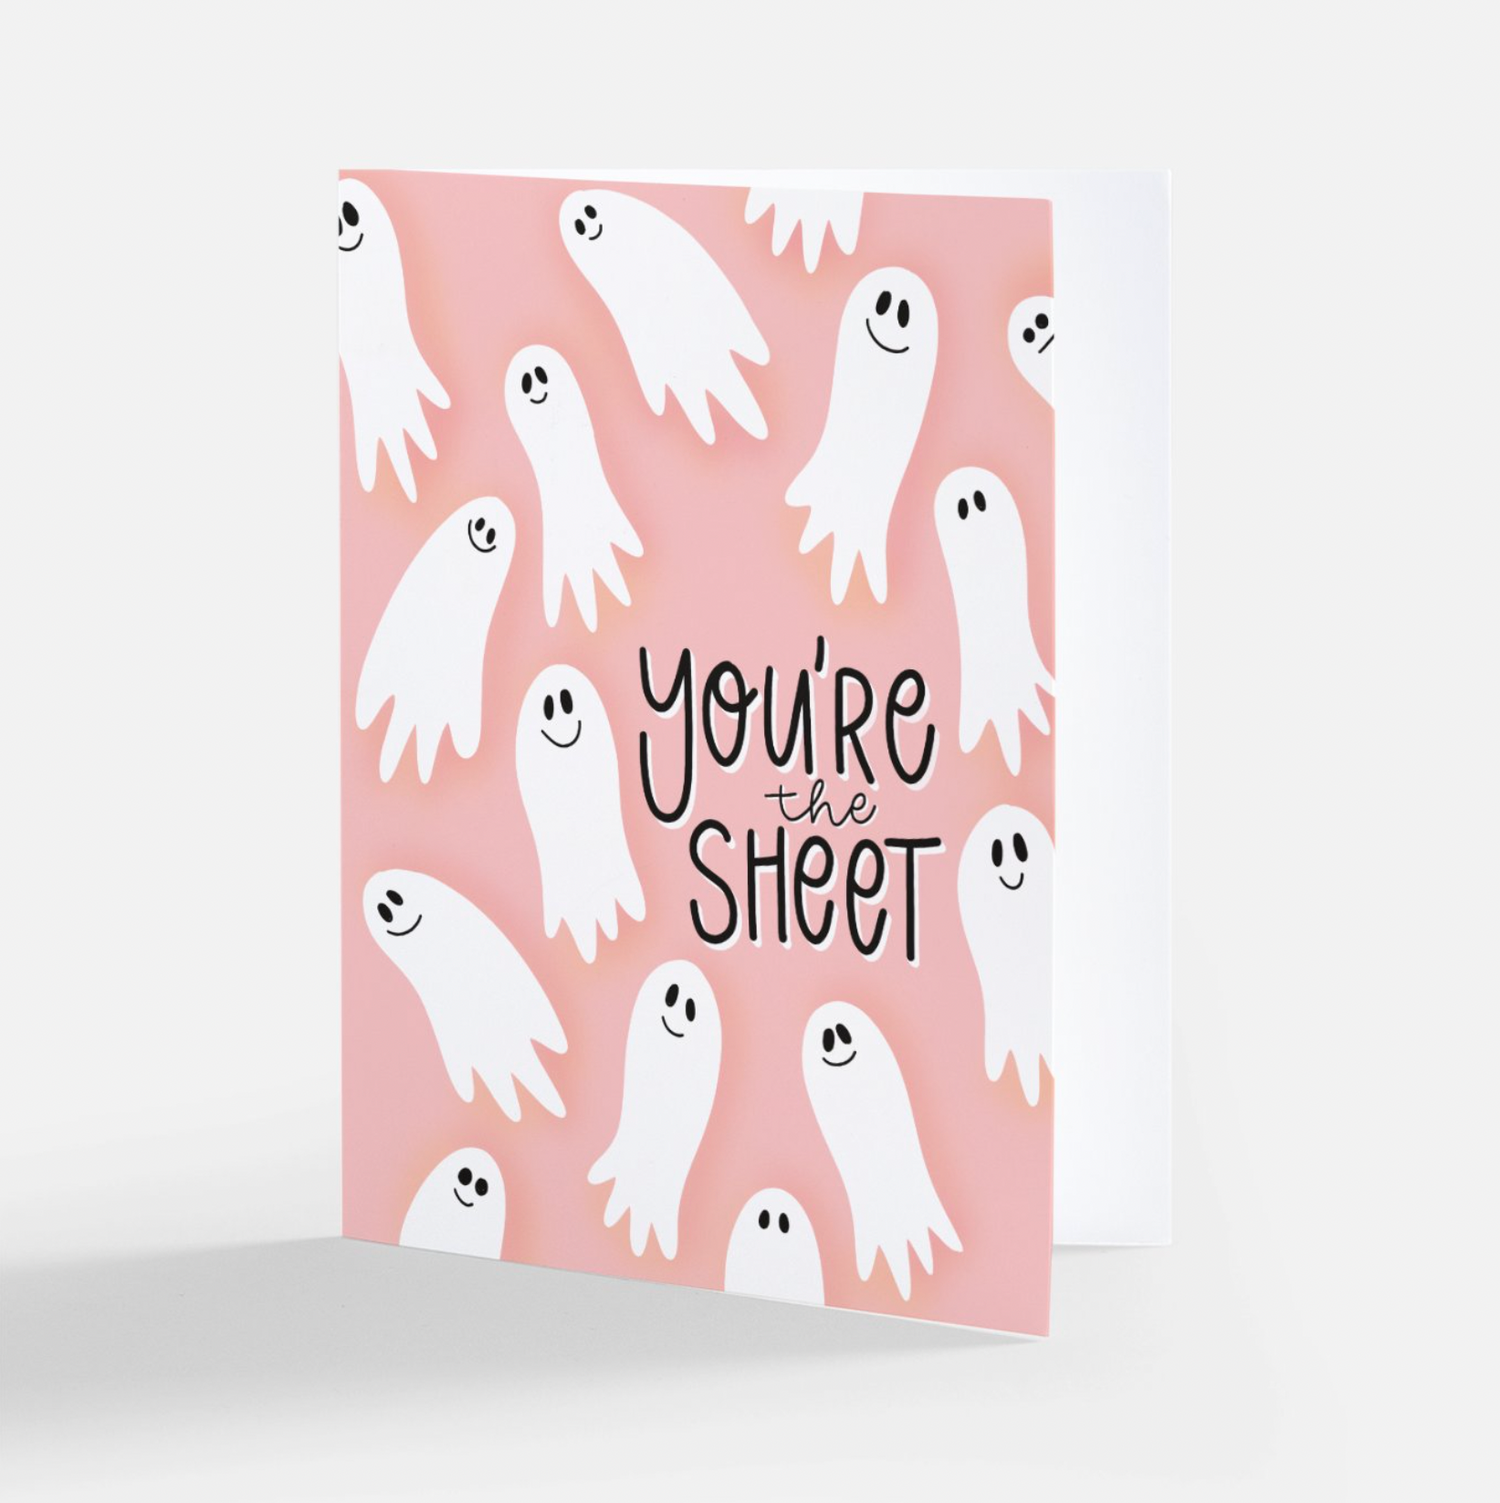 Halloween greeting card. snarky greeting card. Pun greeting card. Fall greeting card. You're the sheet. Floating ghosts. smile faces. Pink note card. Friendship card. Spooky season greeting card. a2 size. envelope included. Made by Katie Belle Co. 